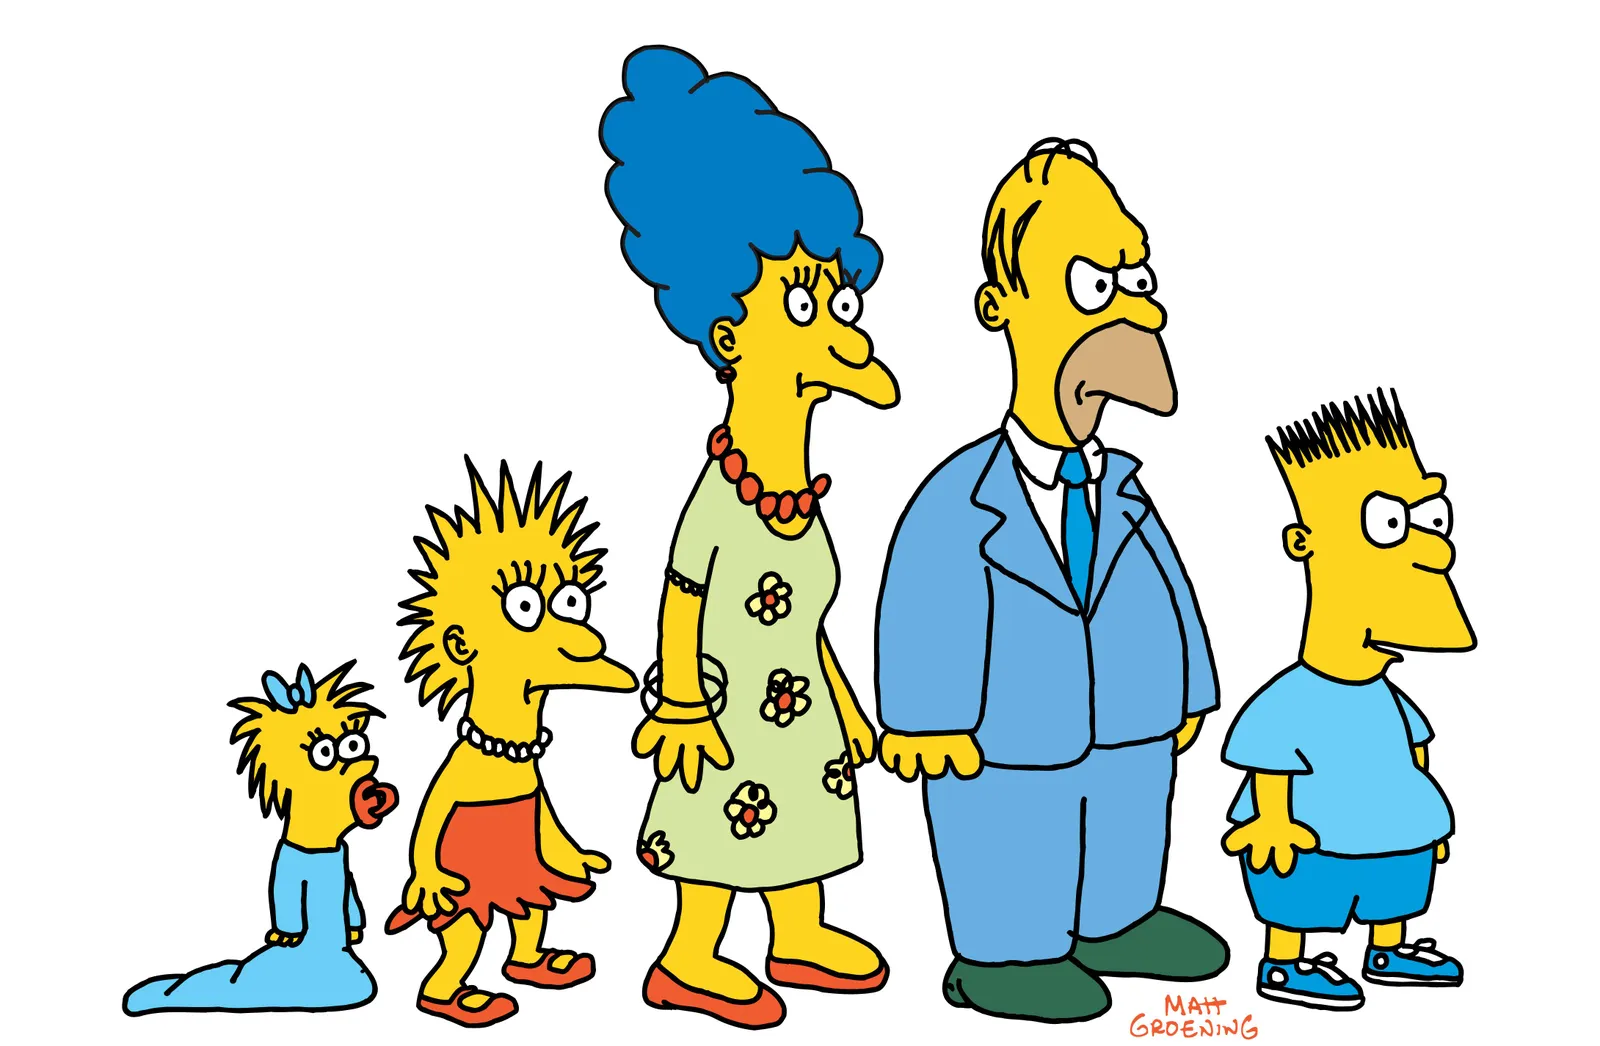 The Simpsons, what now television